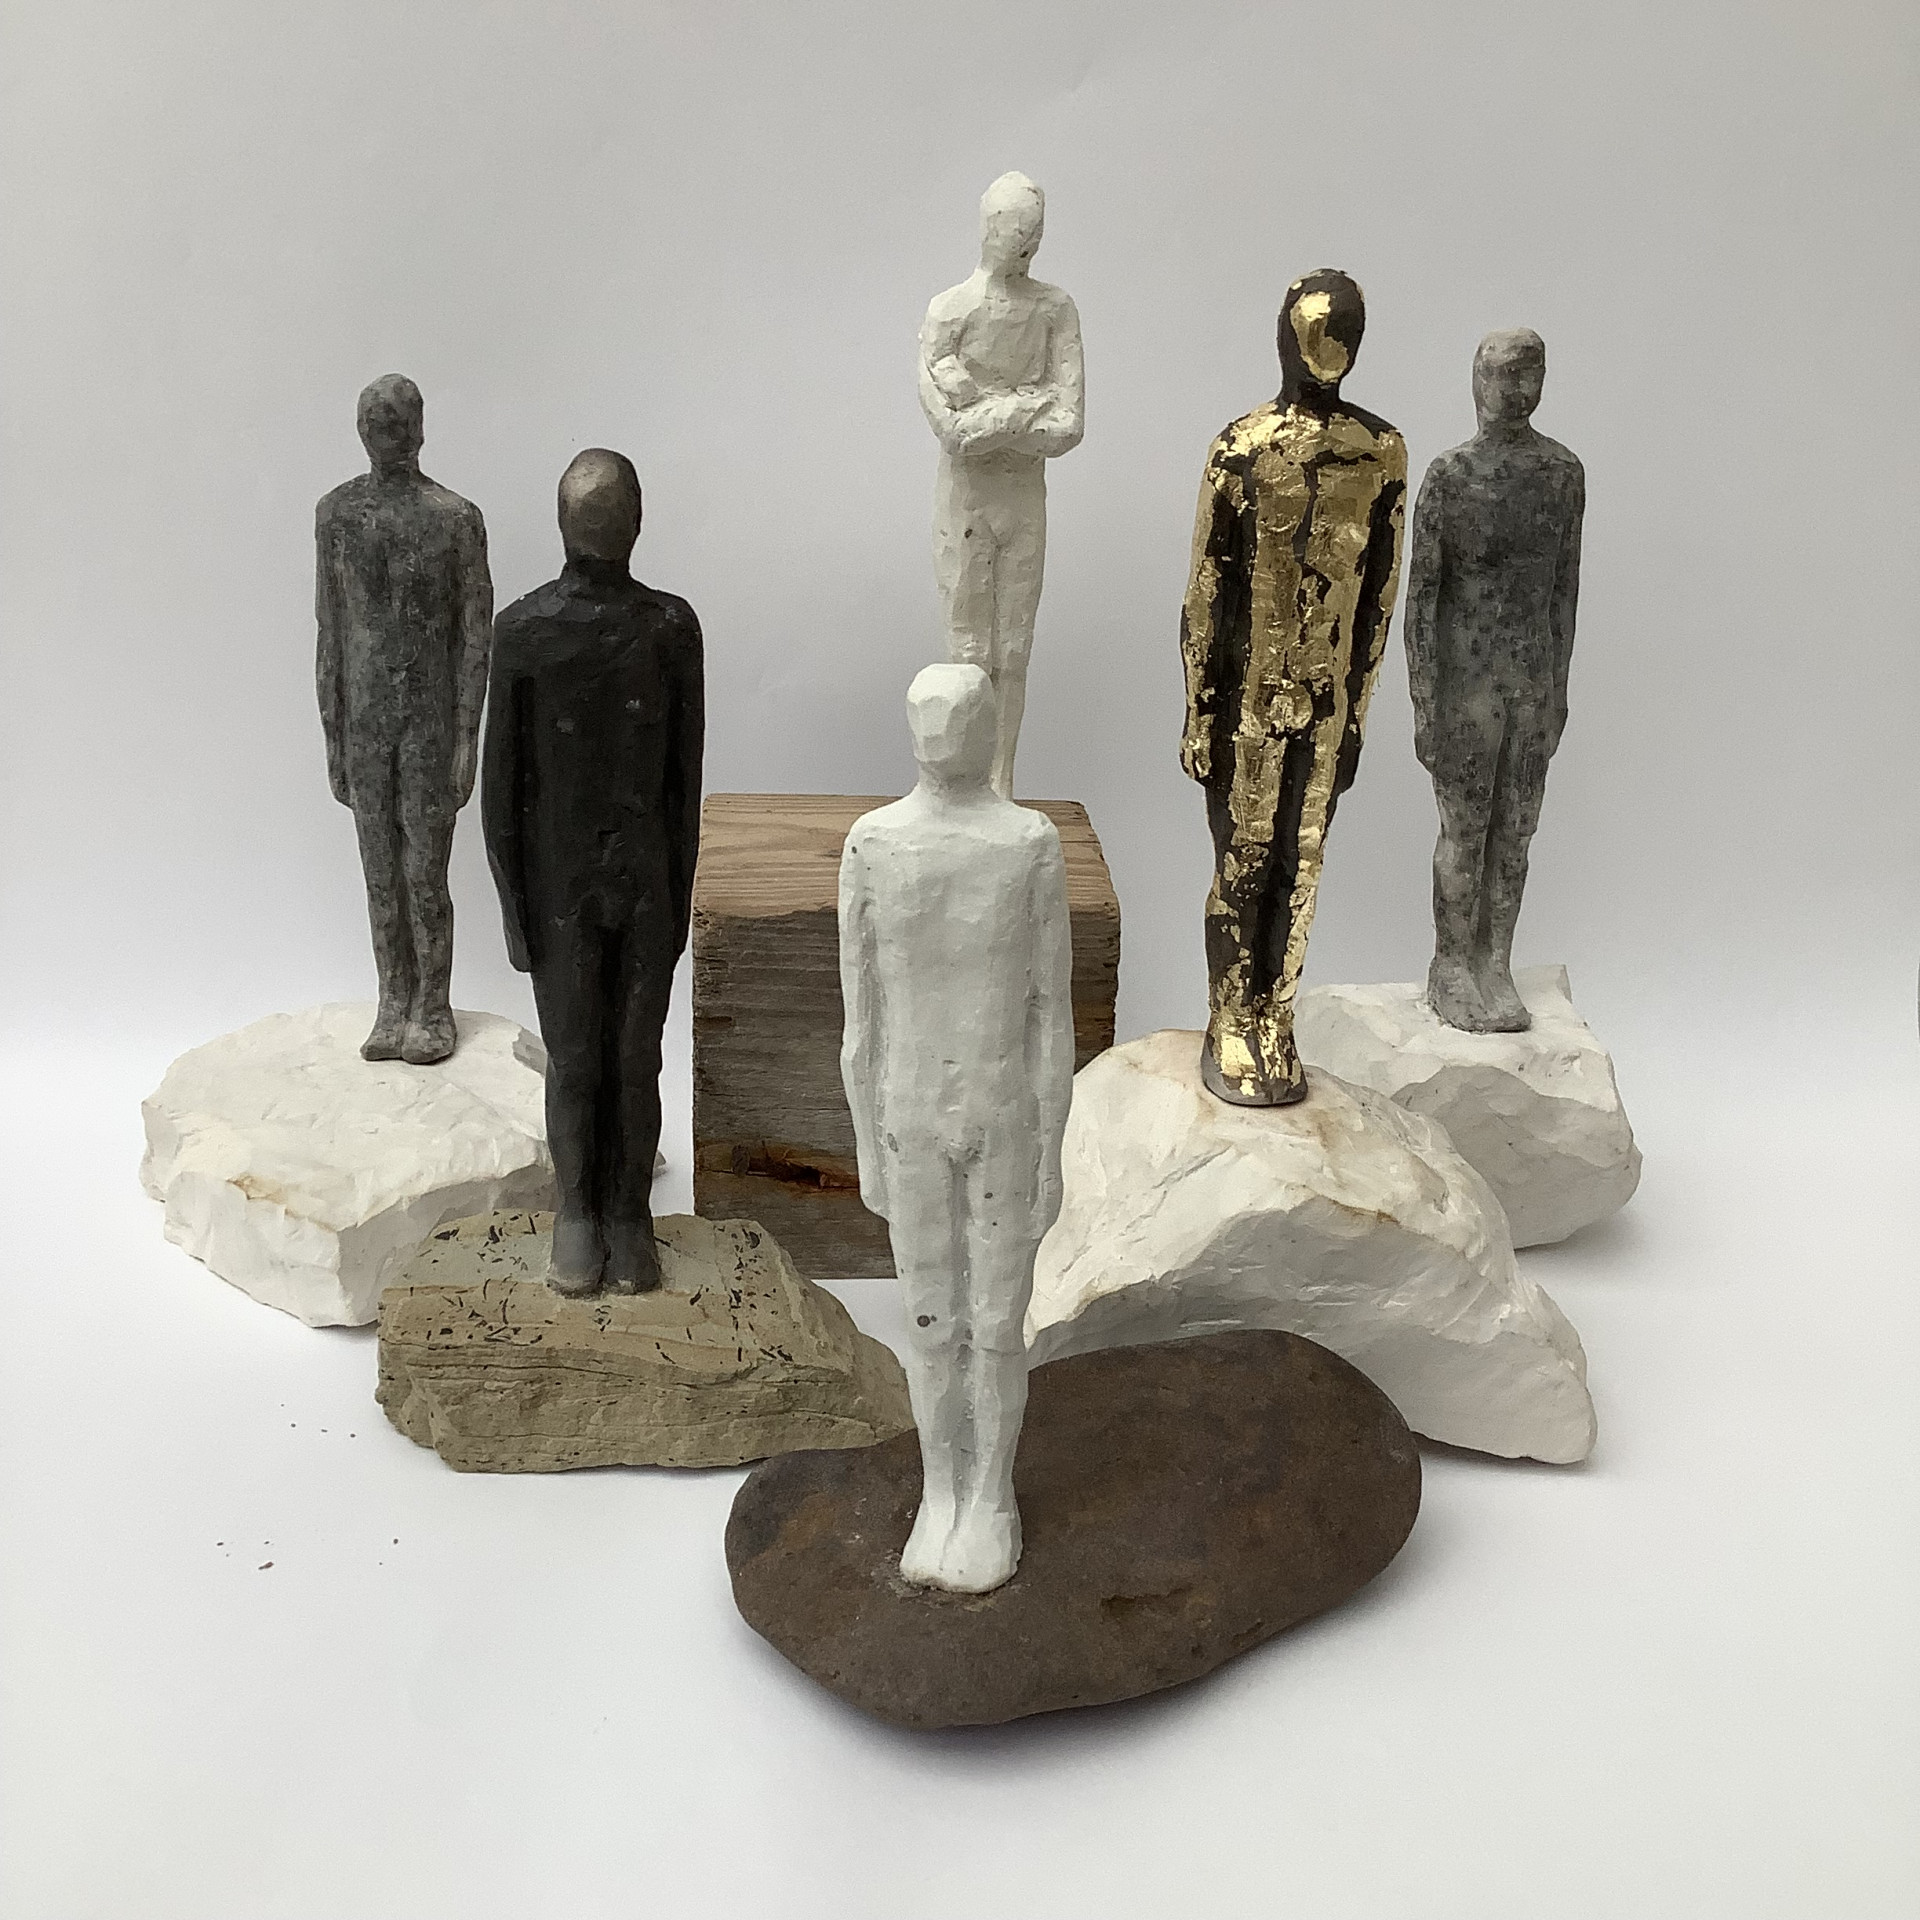 Six sculptures of standing humans in various poses and materials.